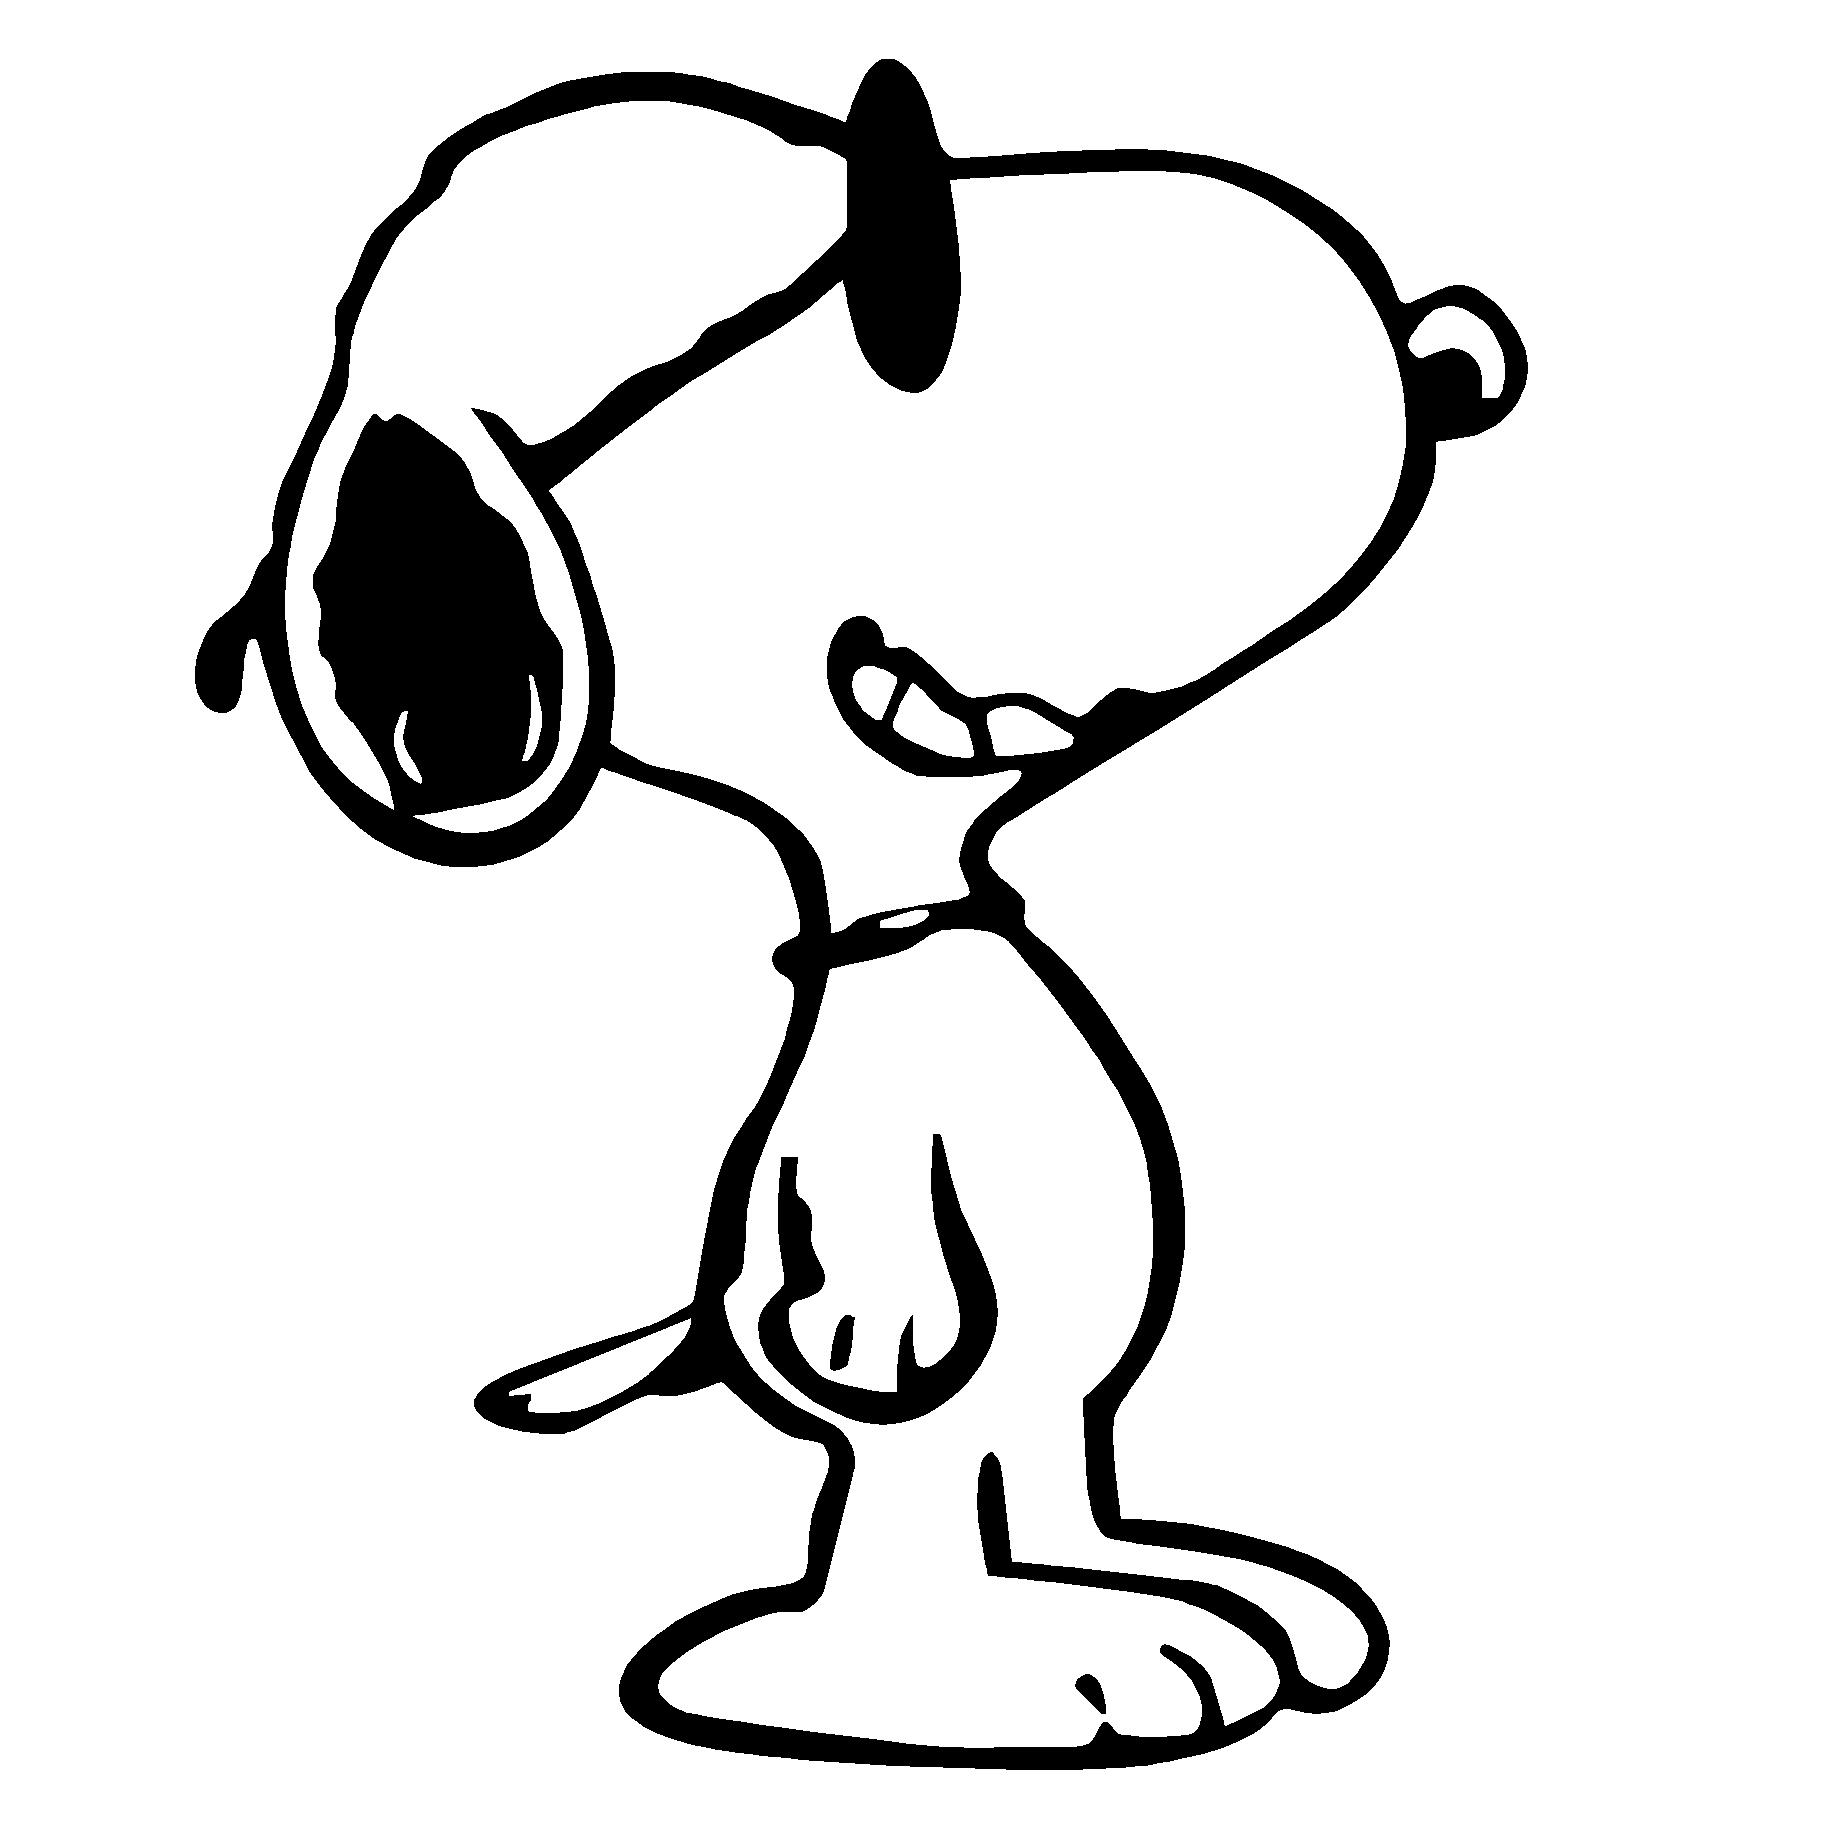 Free Snoopy Clip Art ClipArt Best